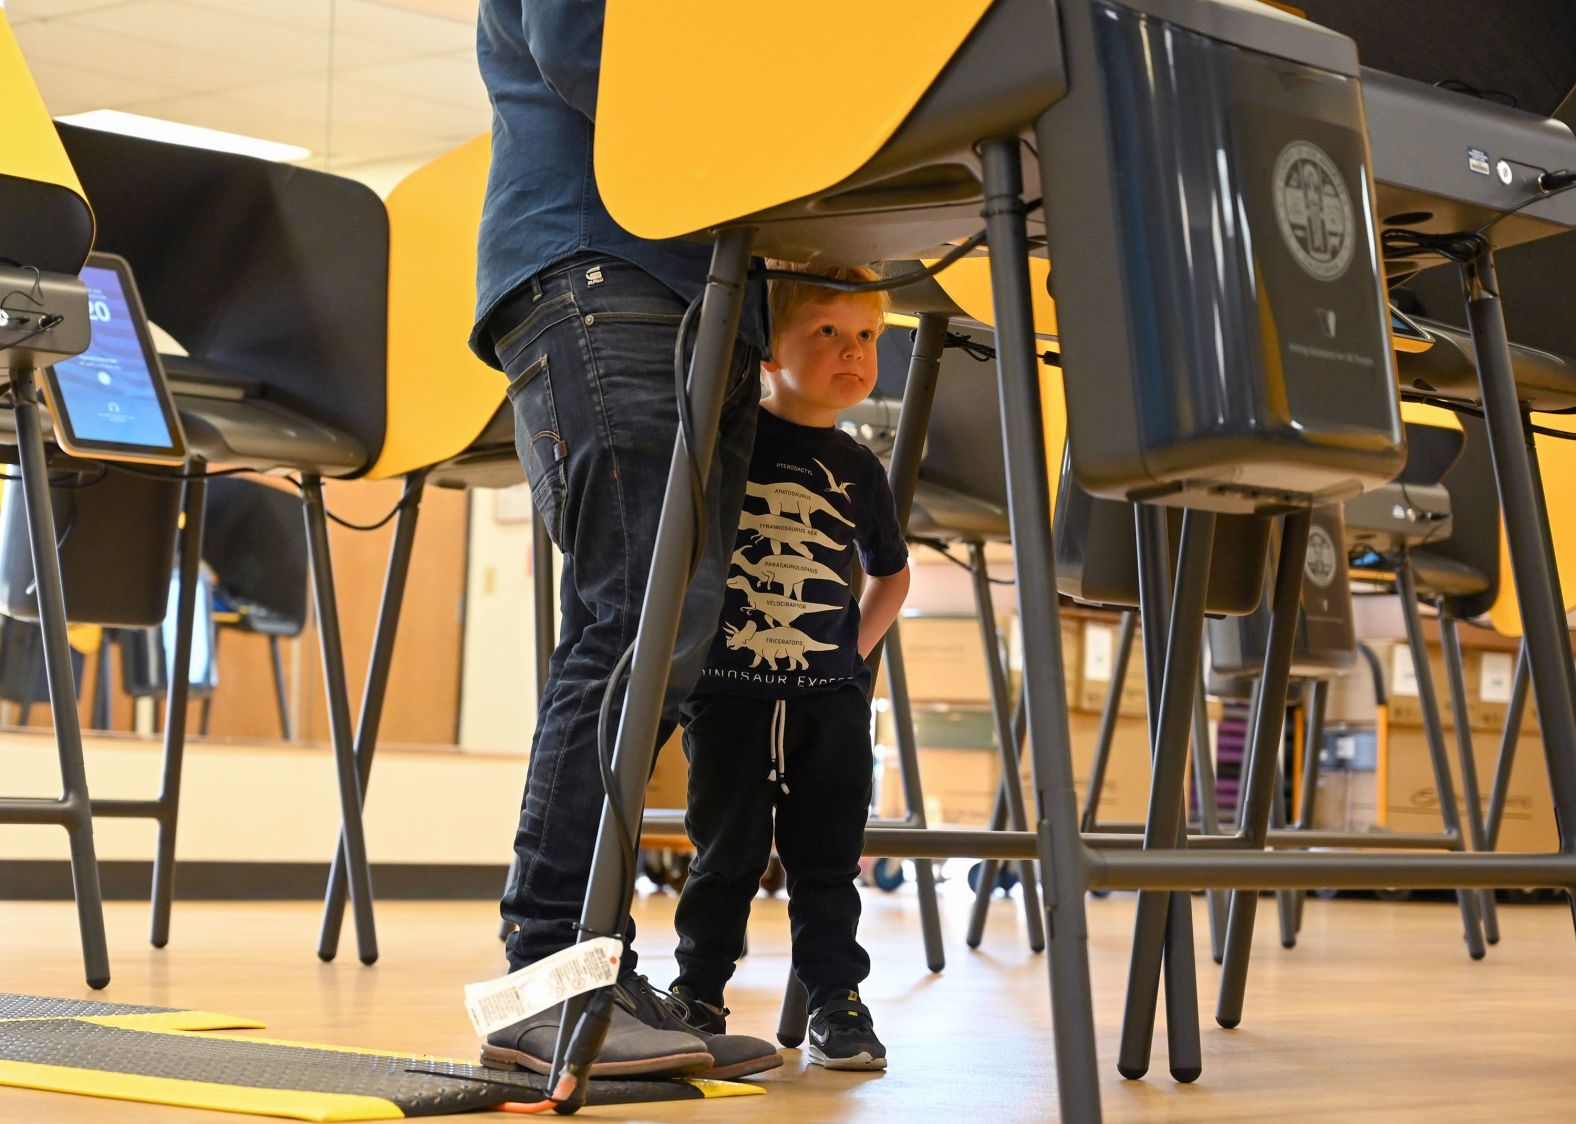 Bennett Stuart looks out from under a voting booth as his father casts an early ballot in Burbank, California, on Monday.